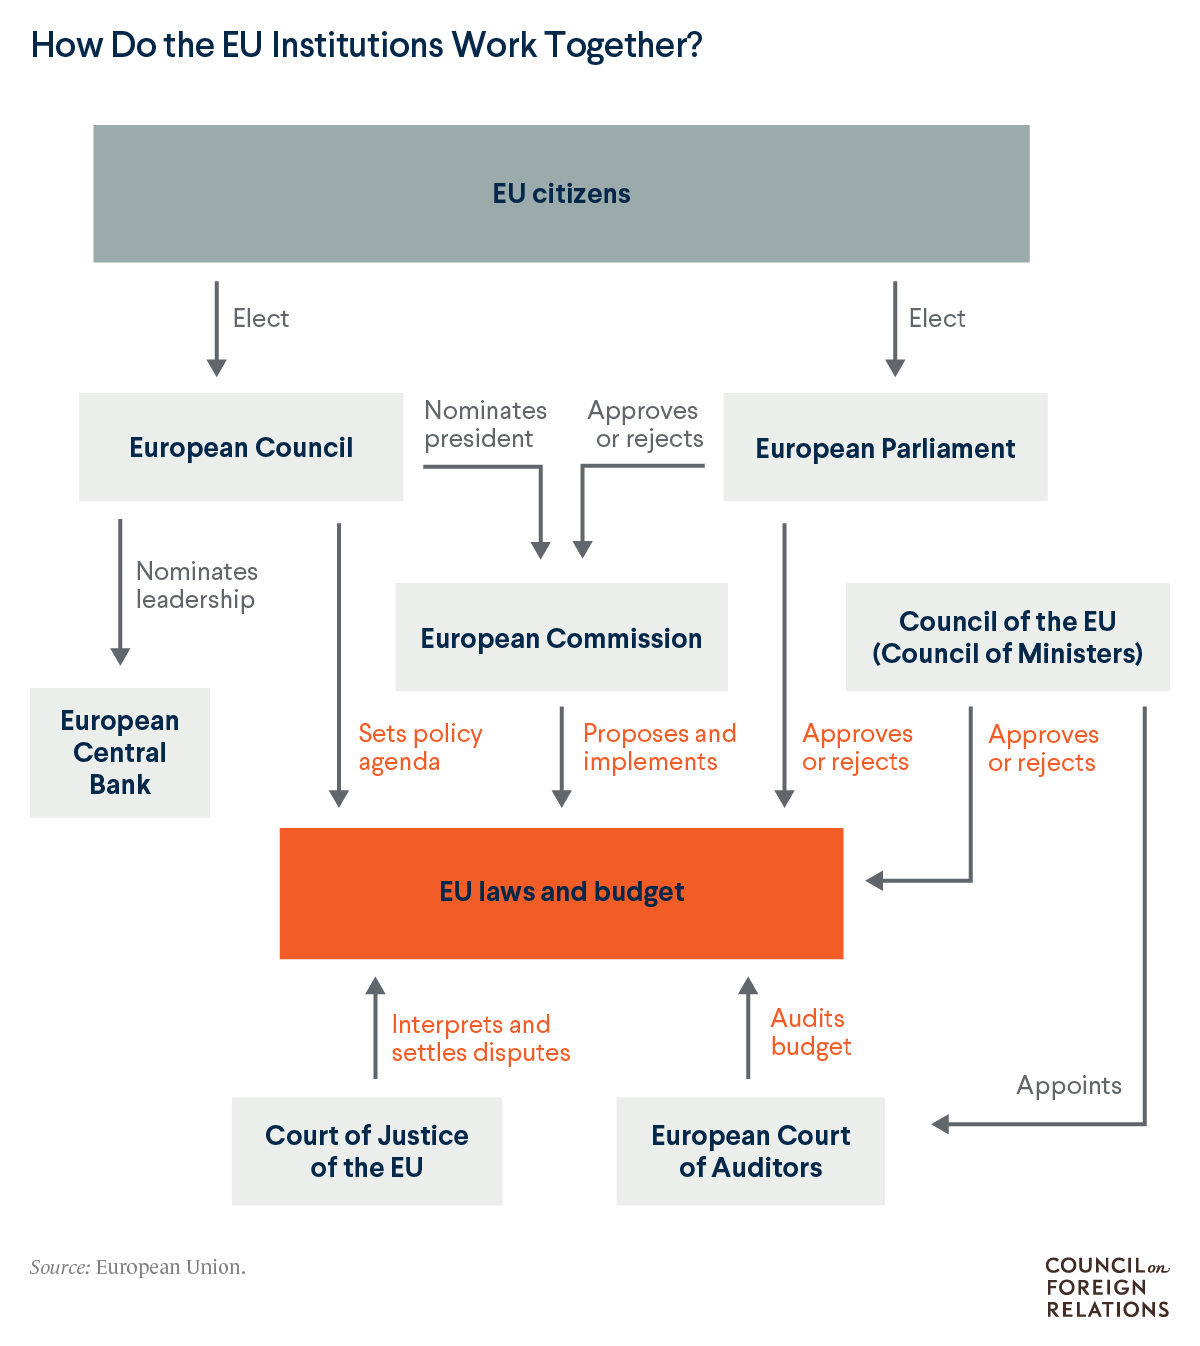 A diagram showing how the EU institutions work together